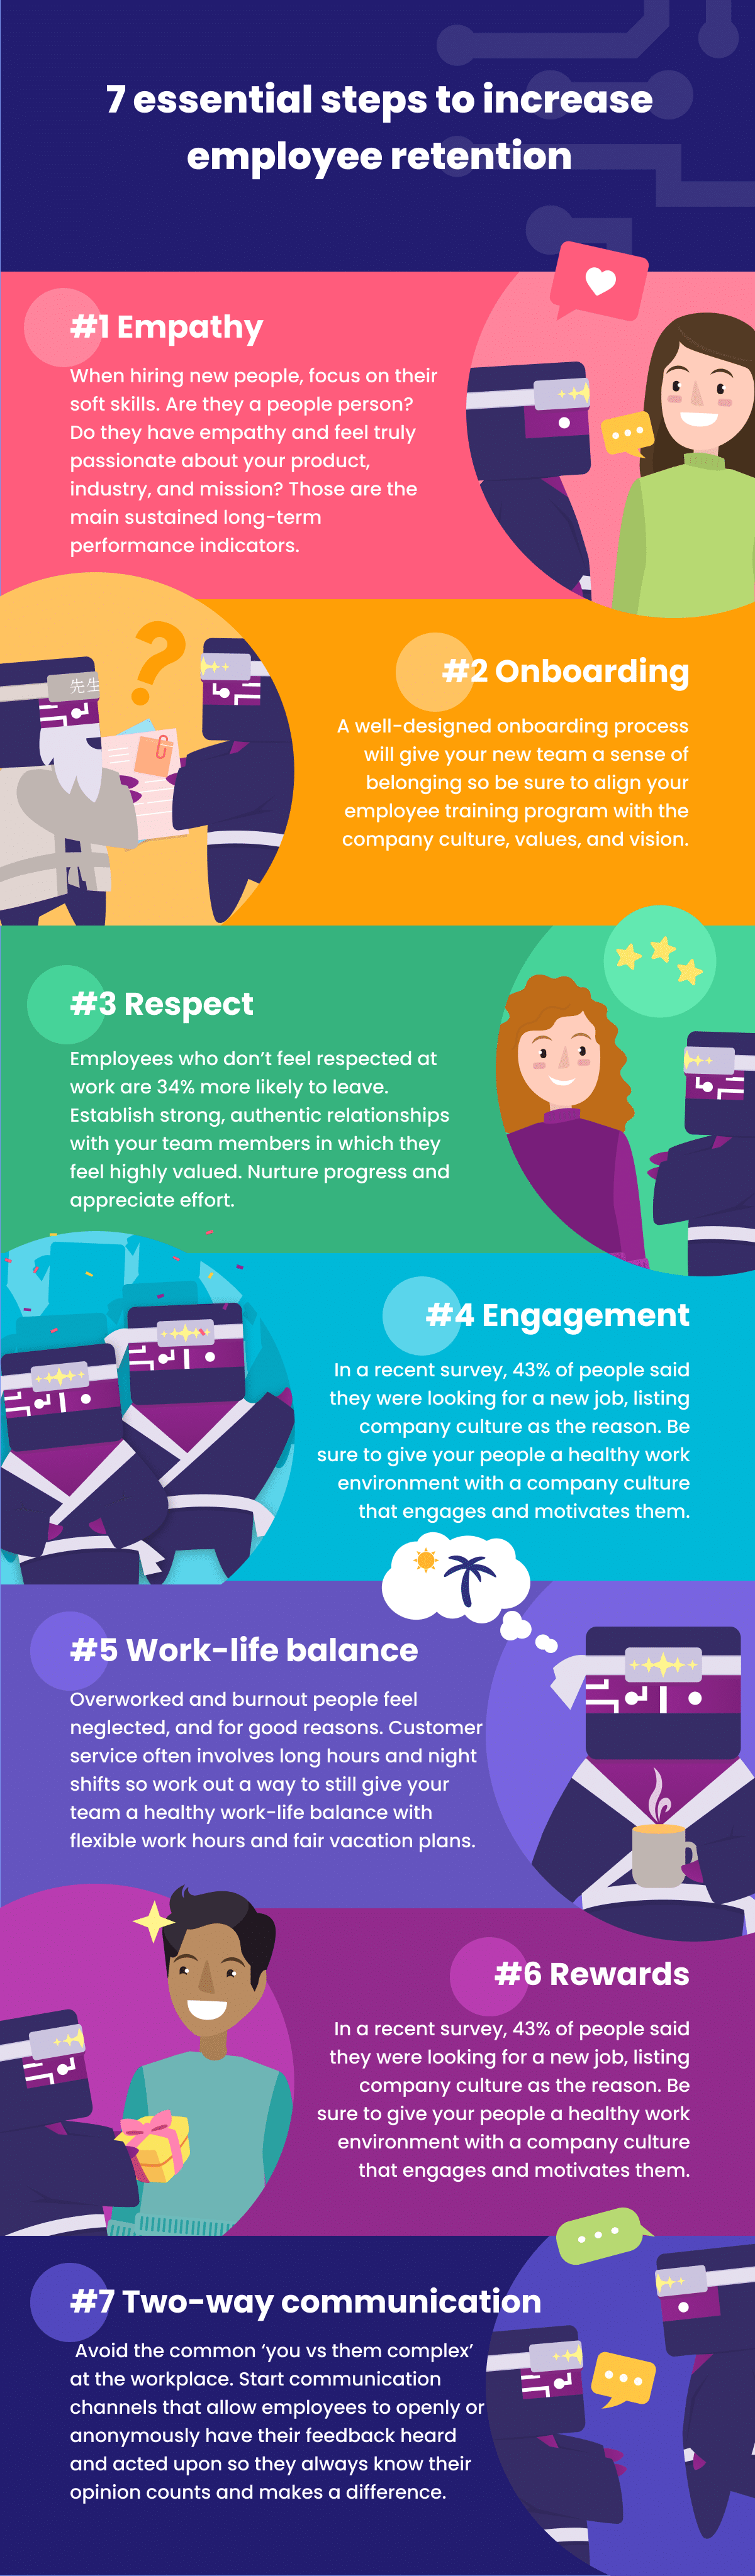 essential steps to increase employee retention_infographic